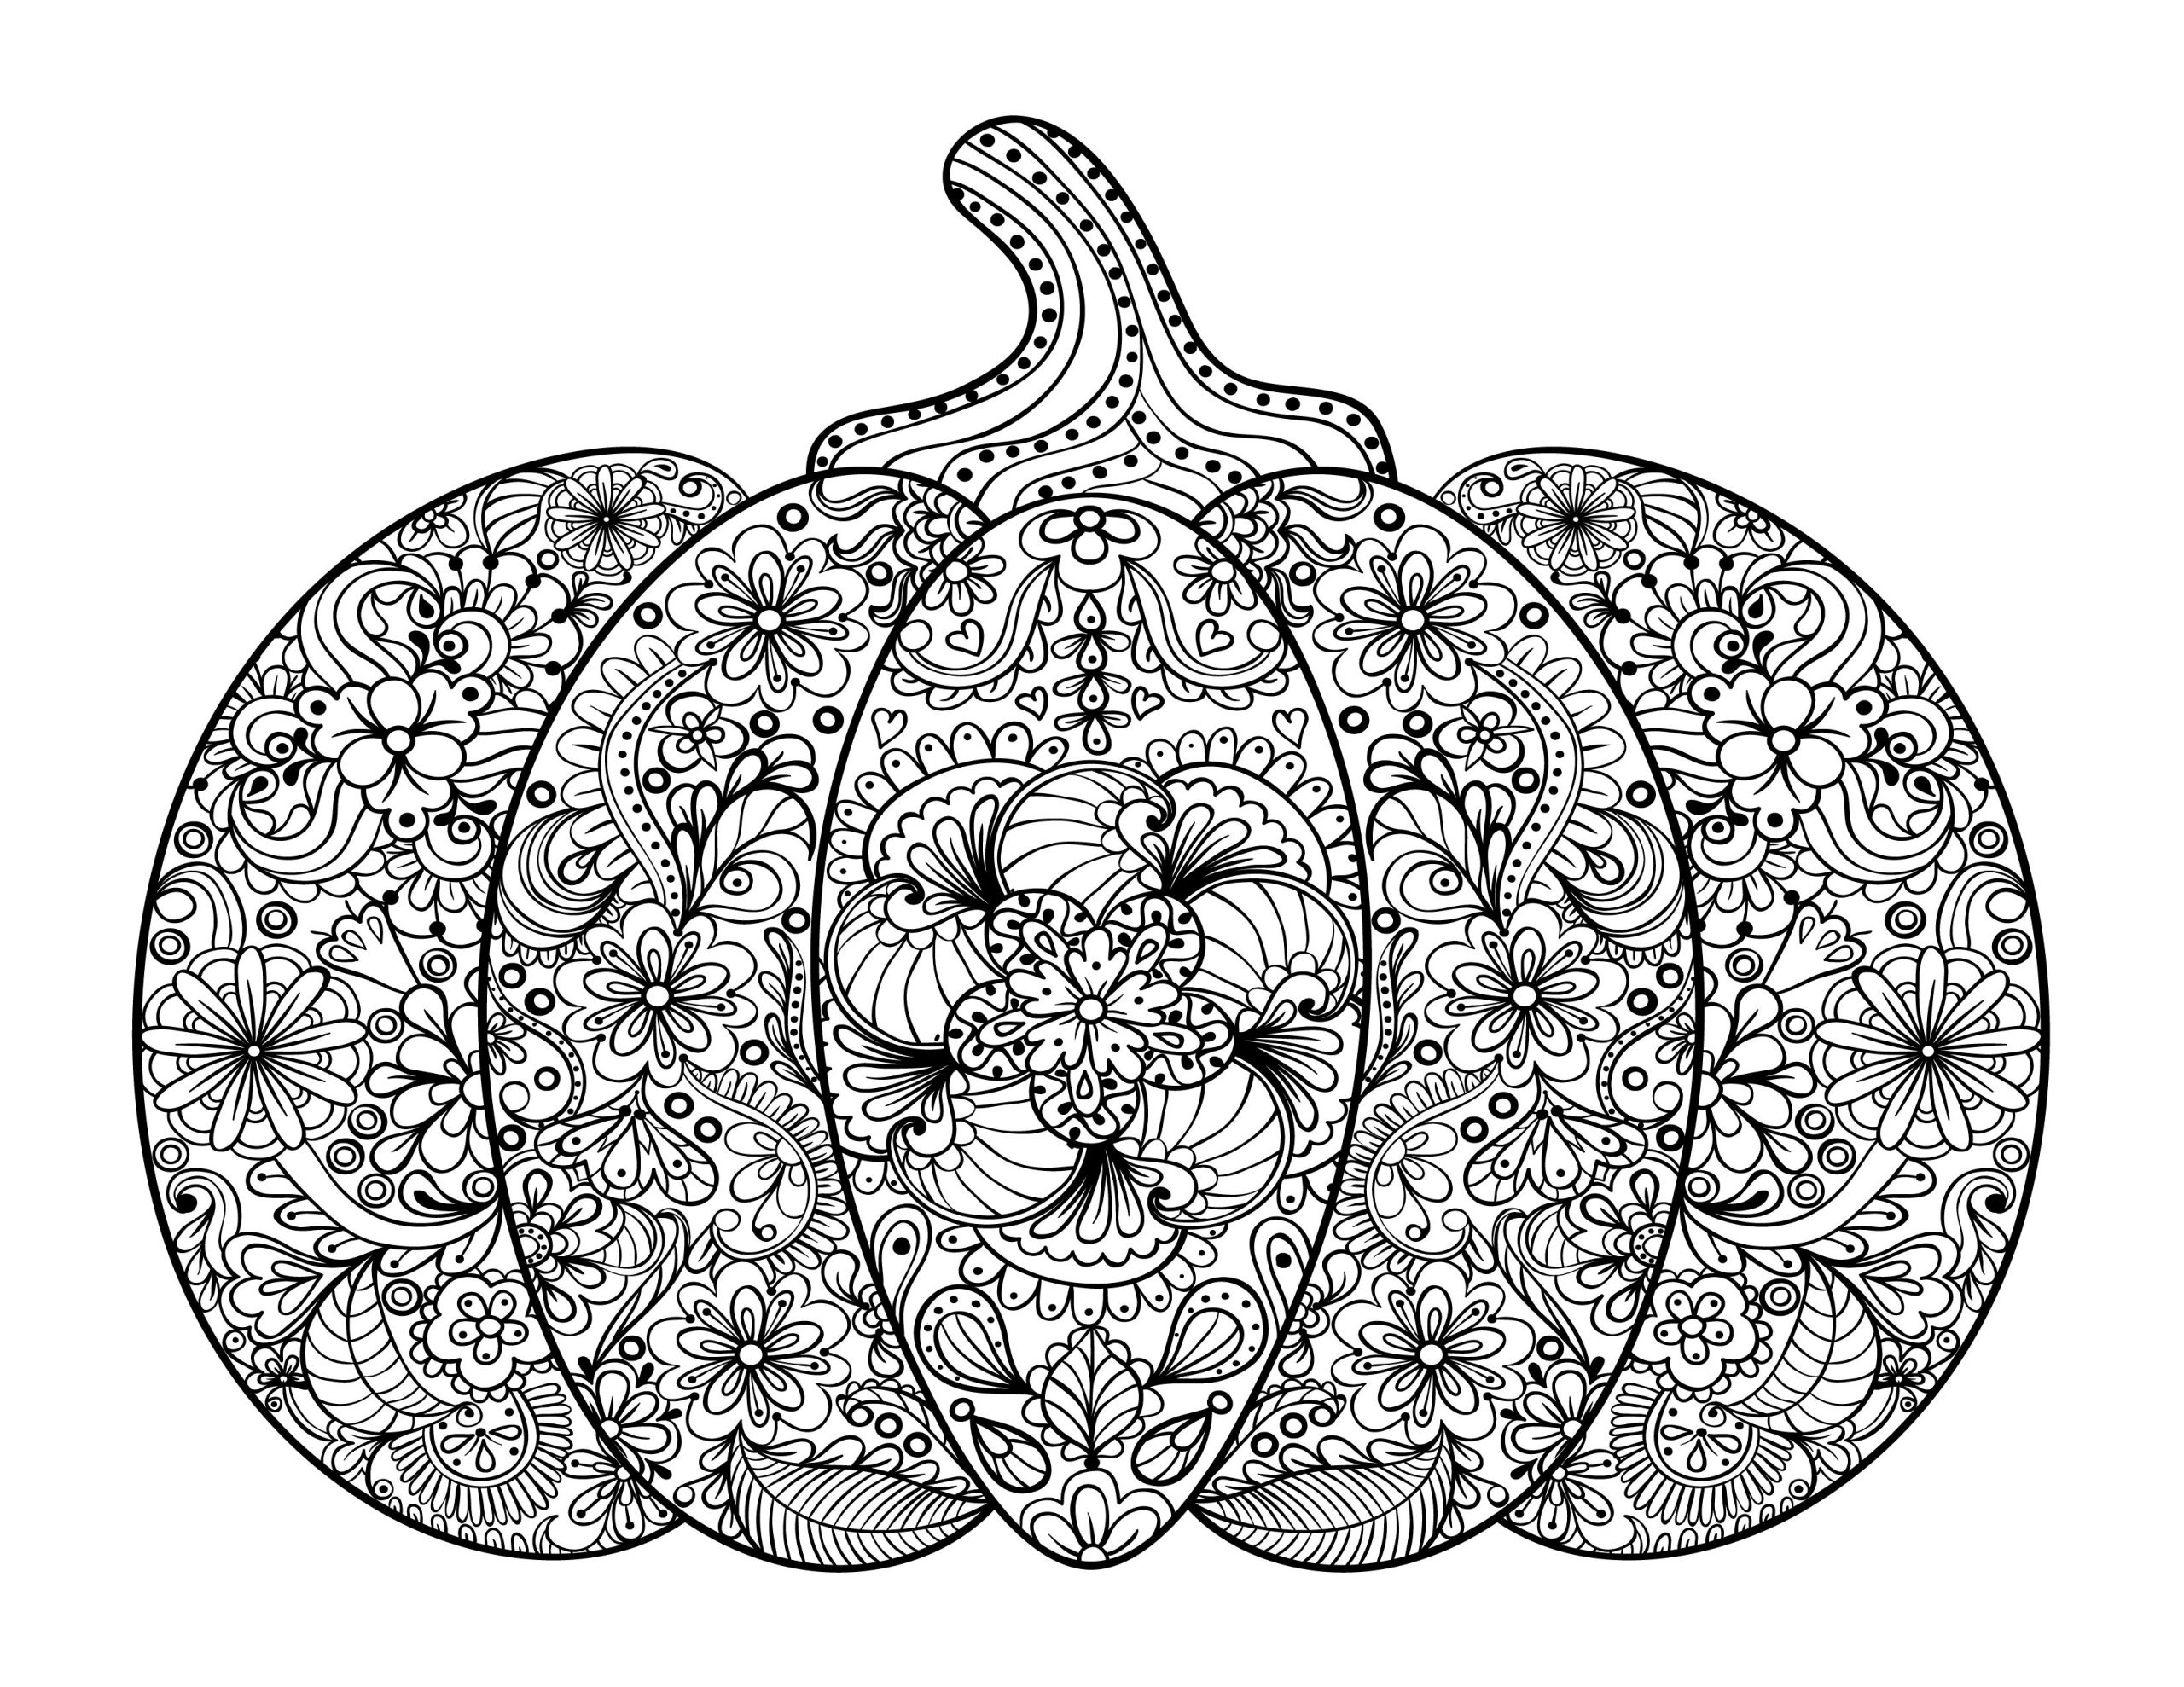 Coloring Sheets For Adults Printable
 Free Adult Coloring Pages Pumpkin Delight Free Pretty